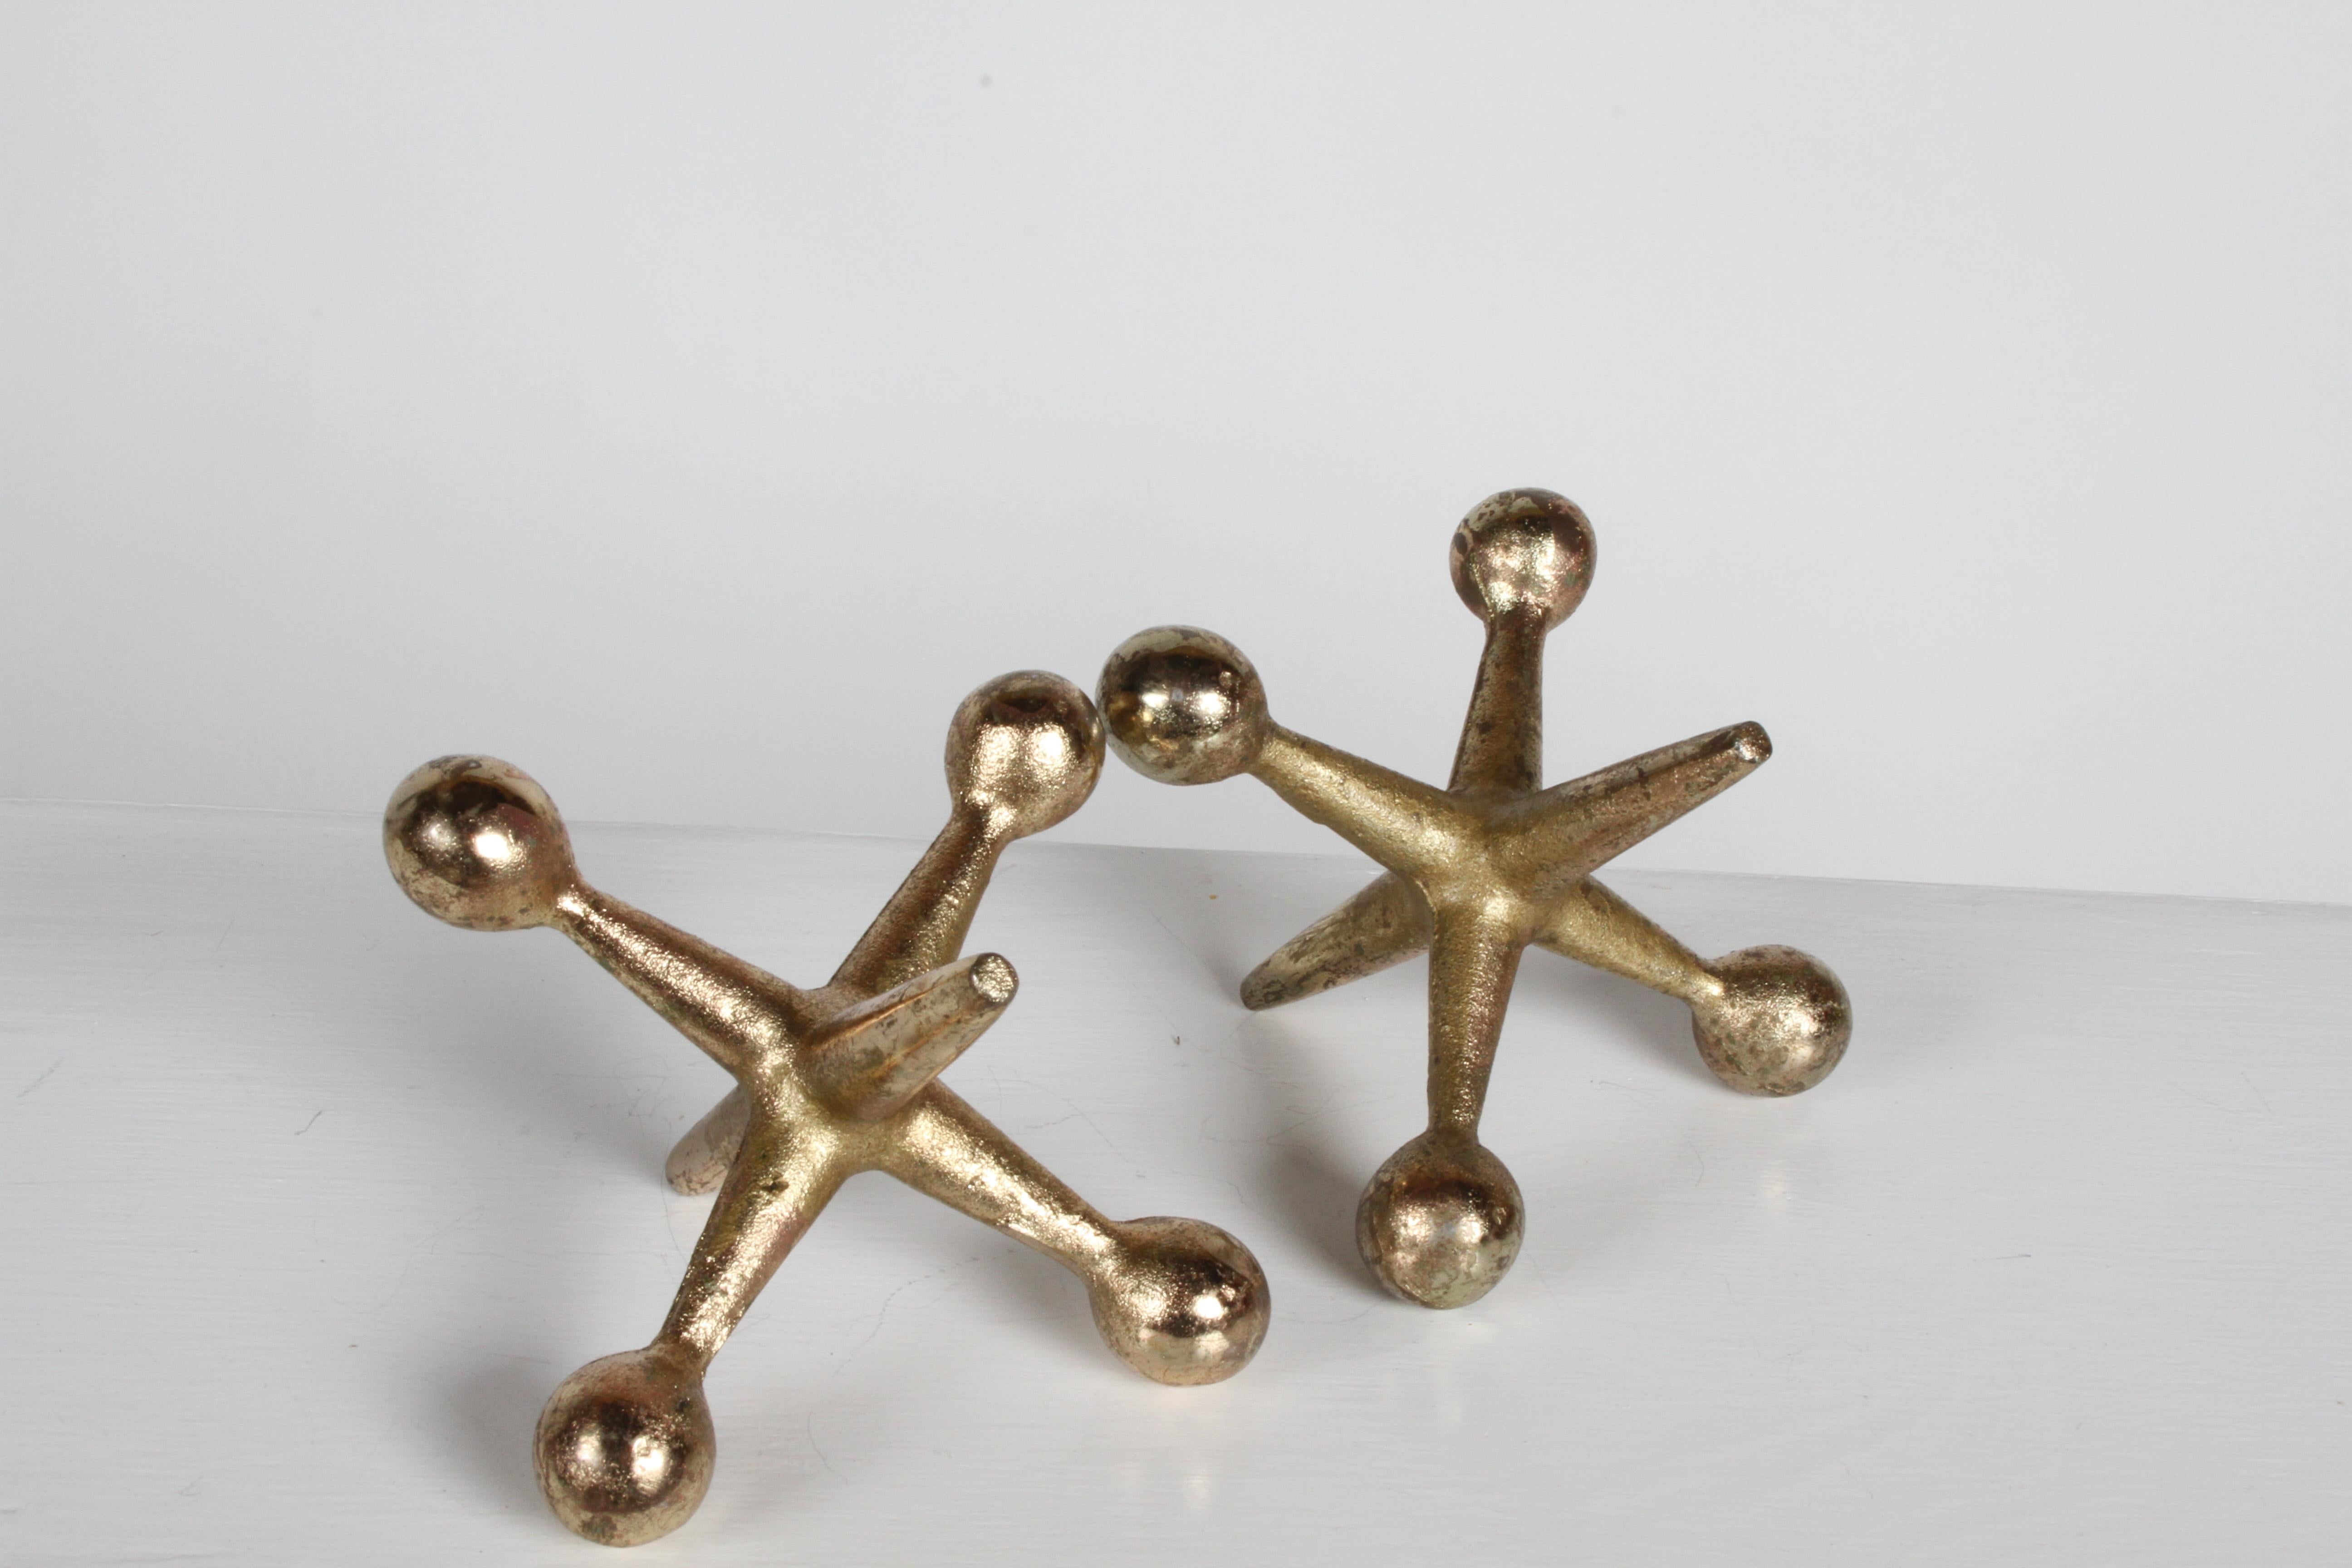 Plated Pair of Mid-Century Modern Brass Jacks Bookends in the Style of Bill Curry